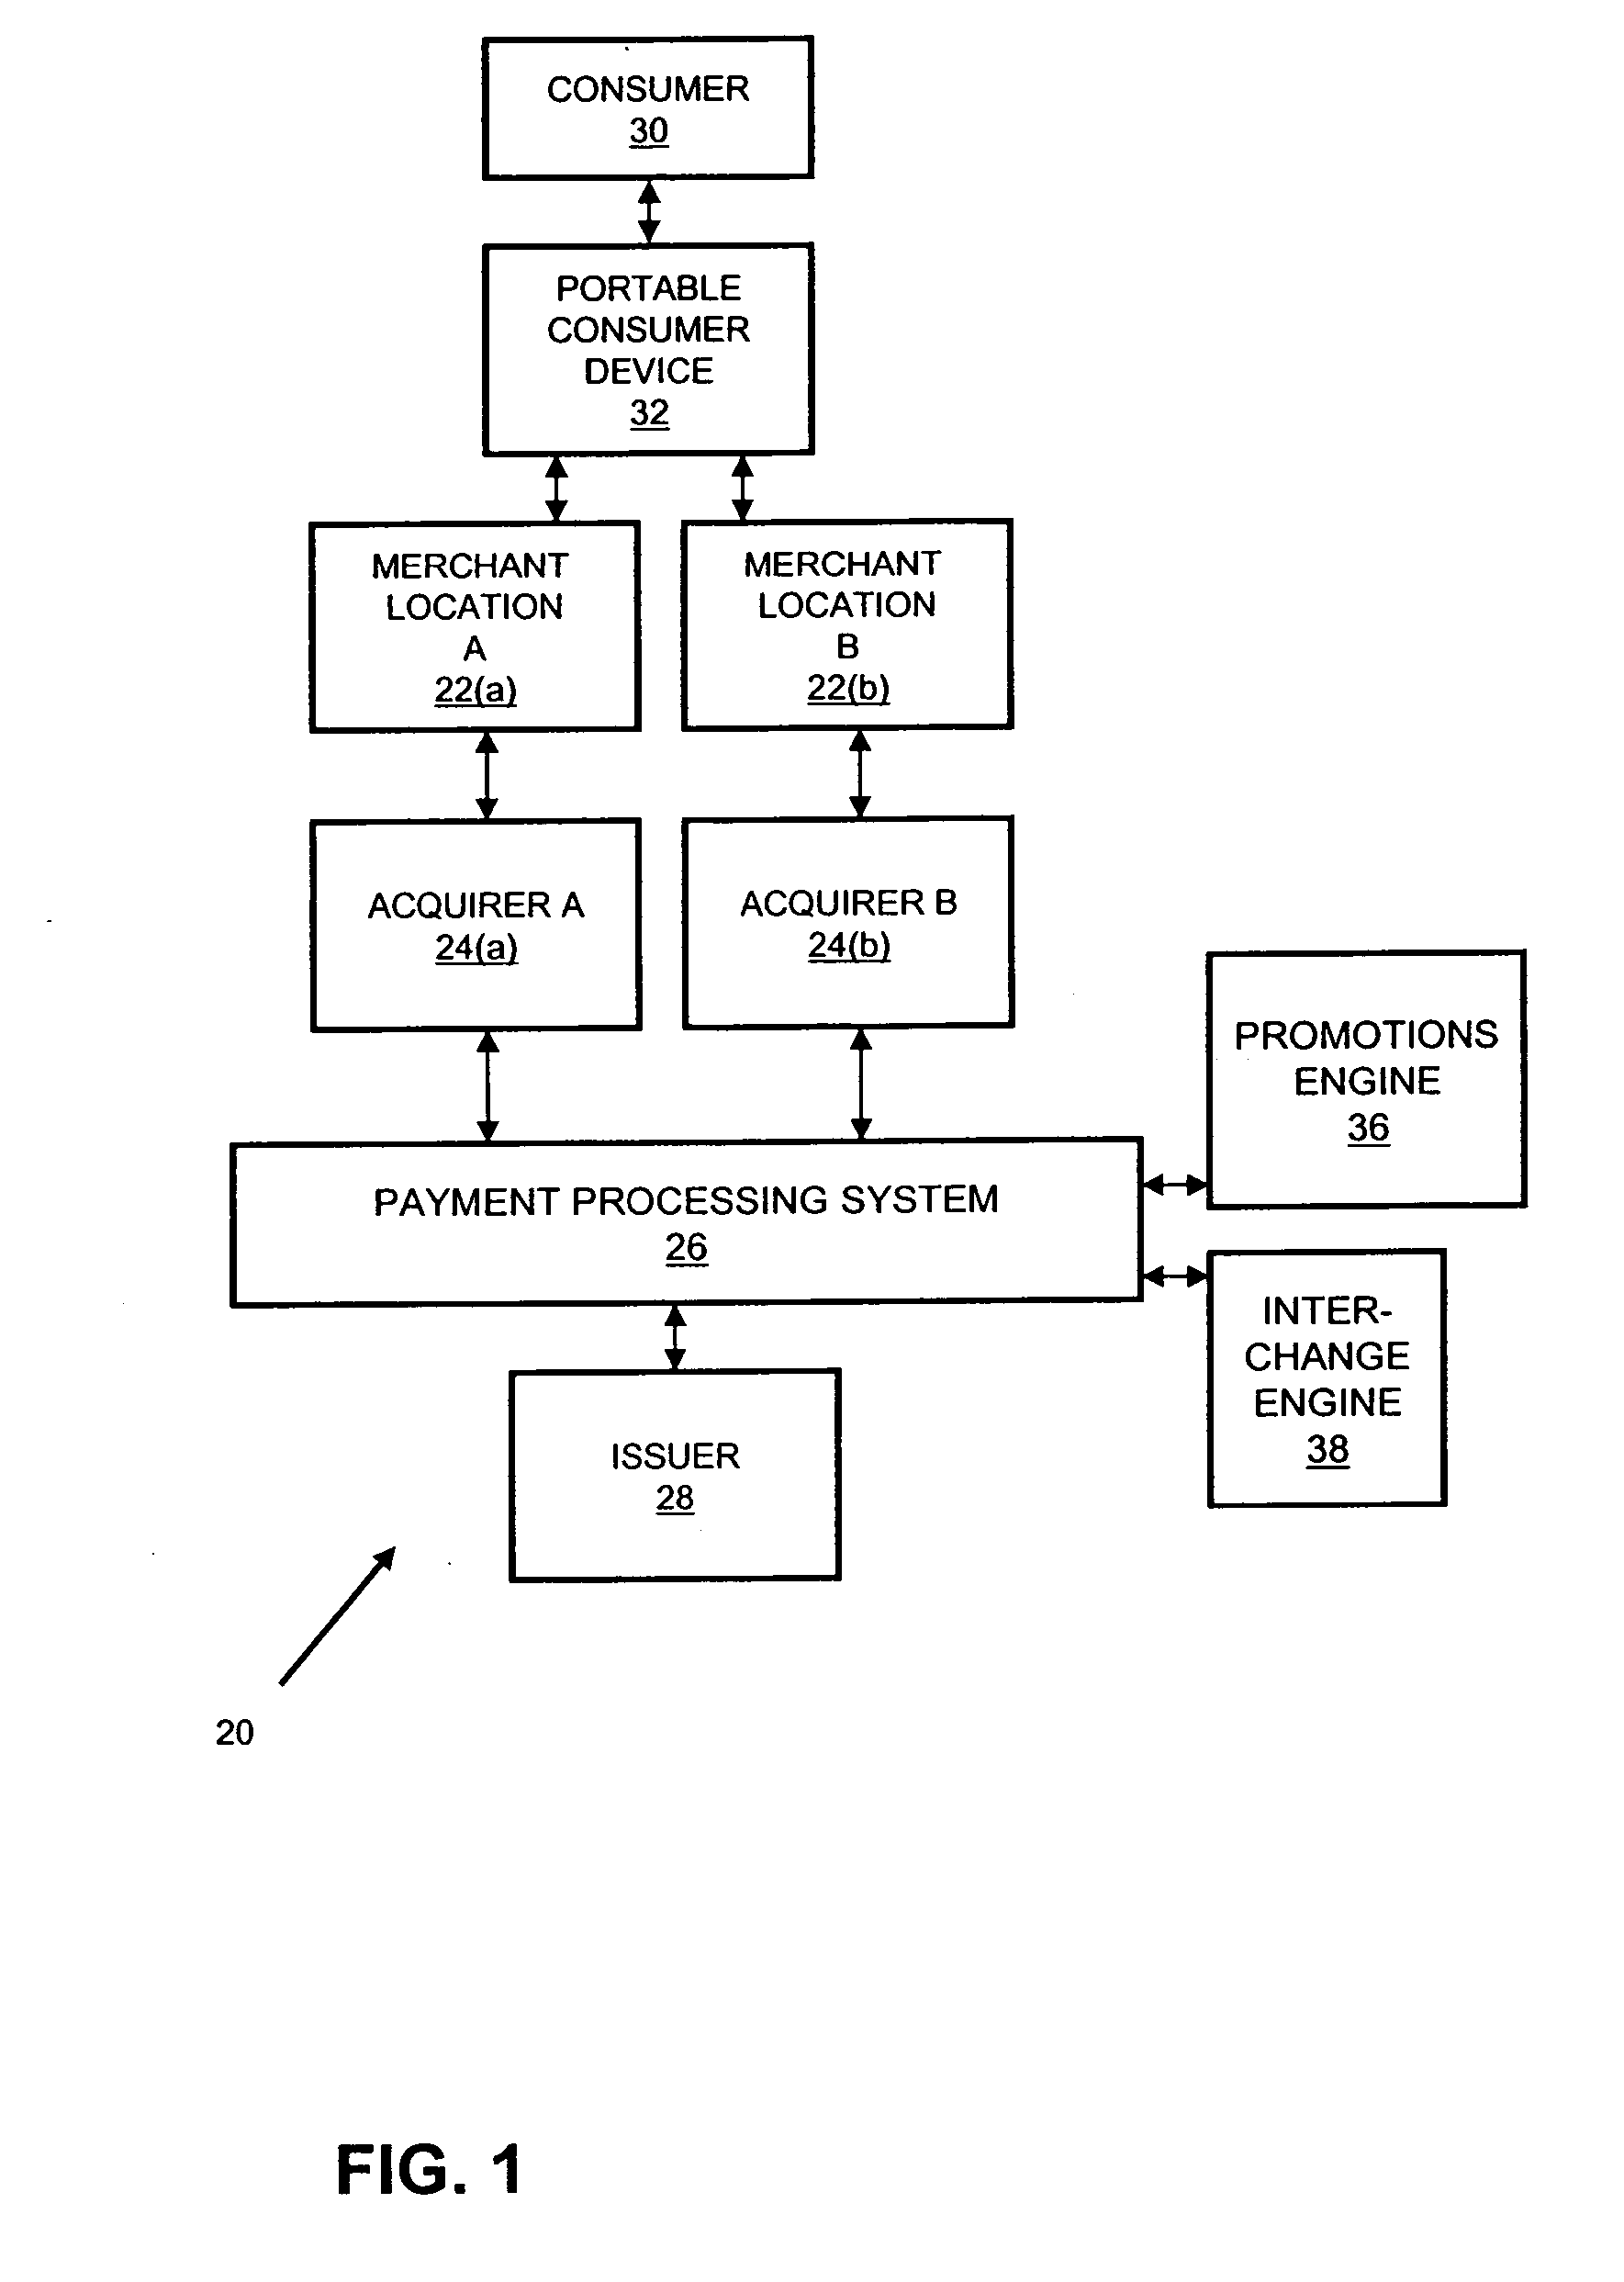 Method and system for conducting promotional programs